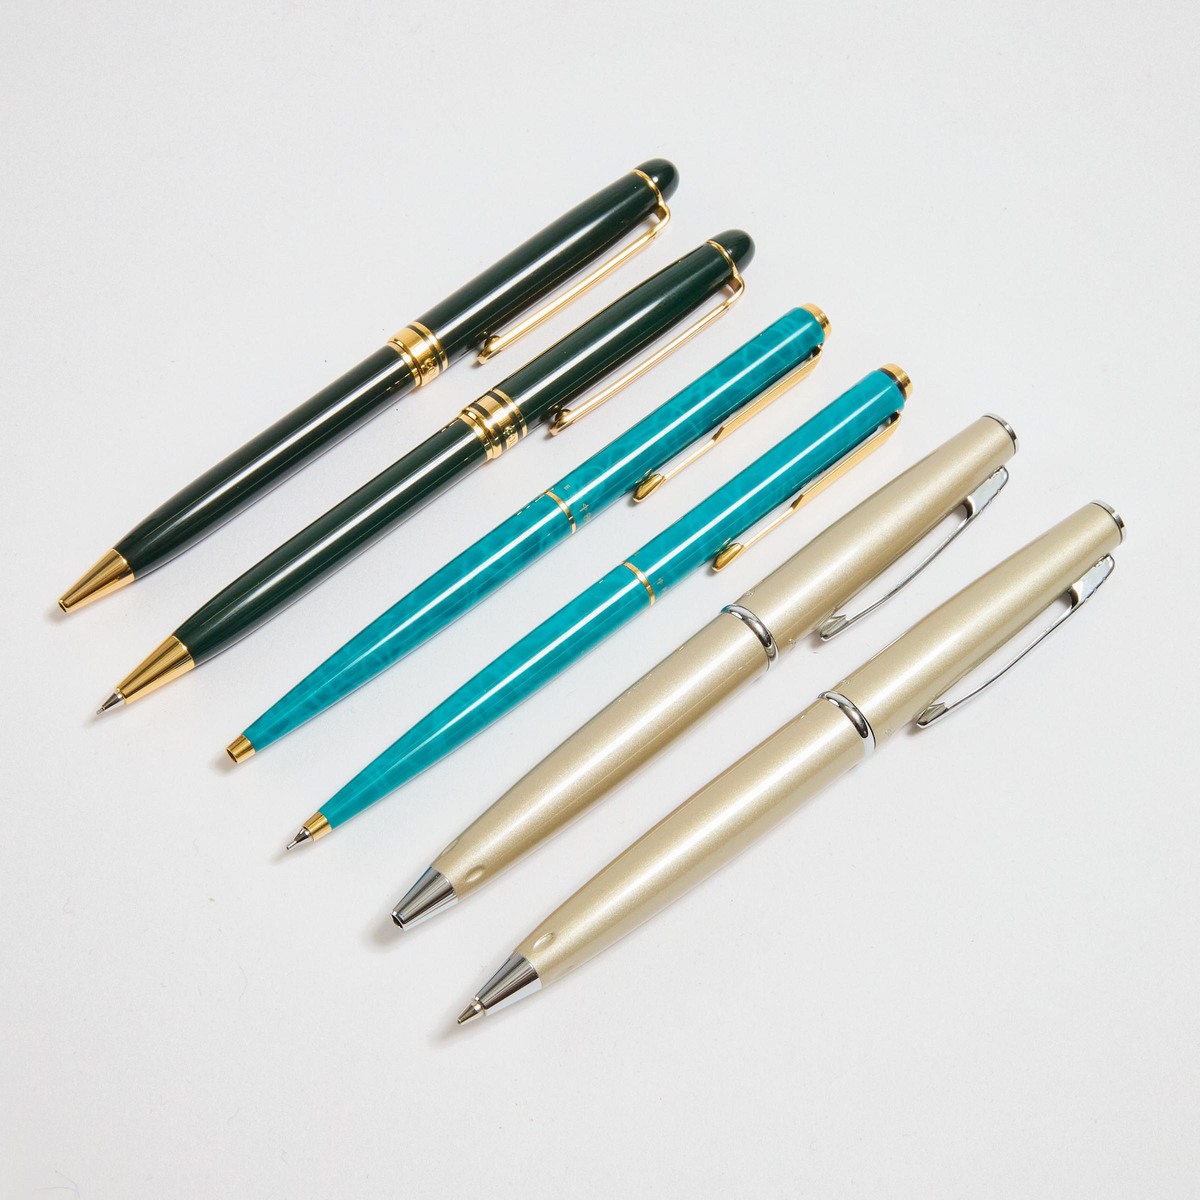 Two Parker Ballpoint Pen And Mechanical Pencil Sets, with turquoise and metallic lacquer bodies; tog